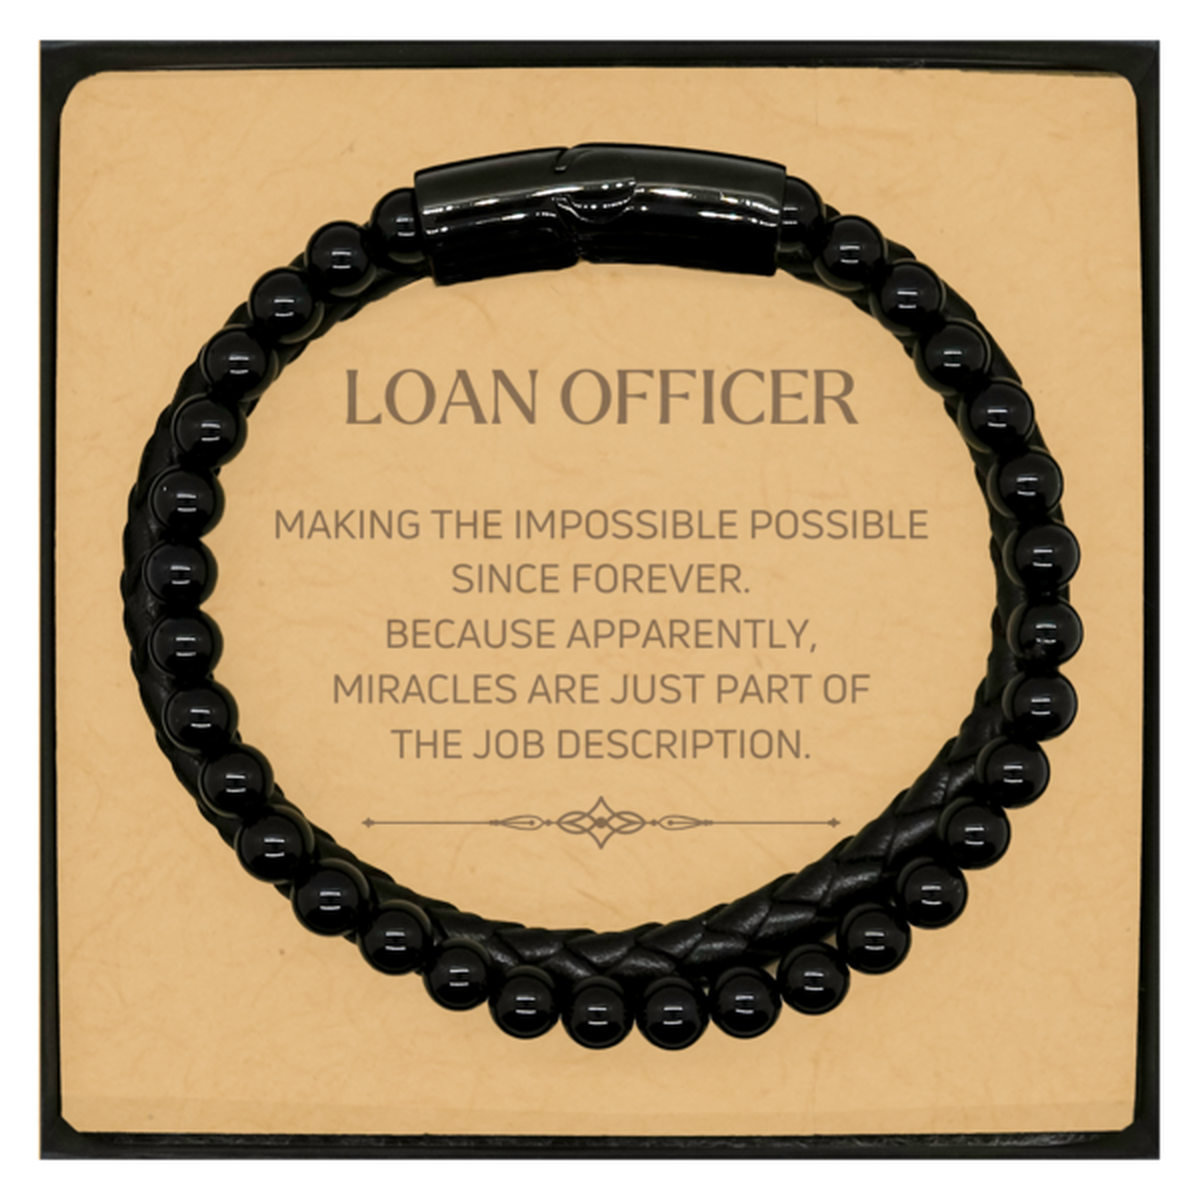 Funny Loan Officer Gifts, Miracles are just part of the job description, Inspirational Birthday Christmas Stone Leather Bracelets For Loan Officer, Men, Women, Coworkers, Friends, Boss